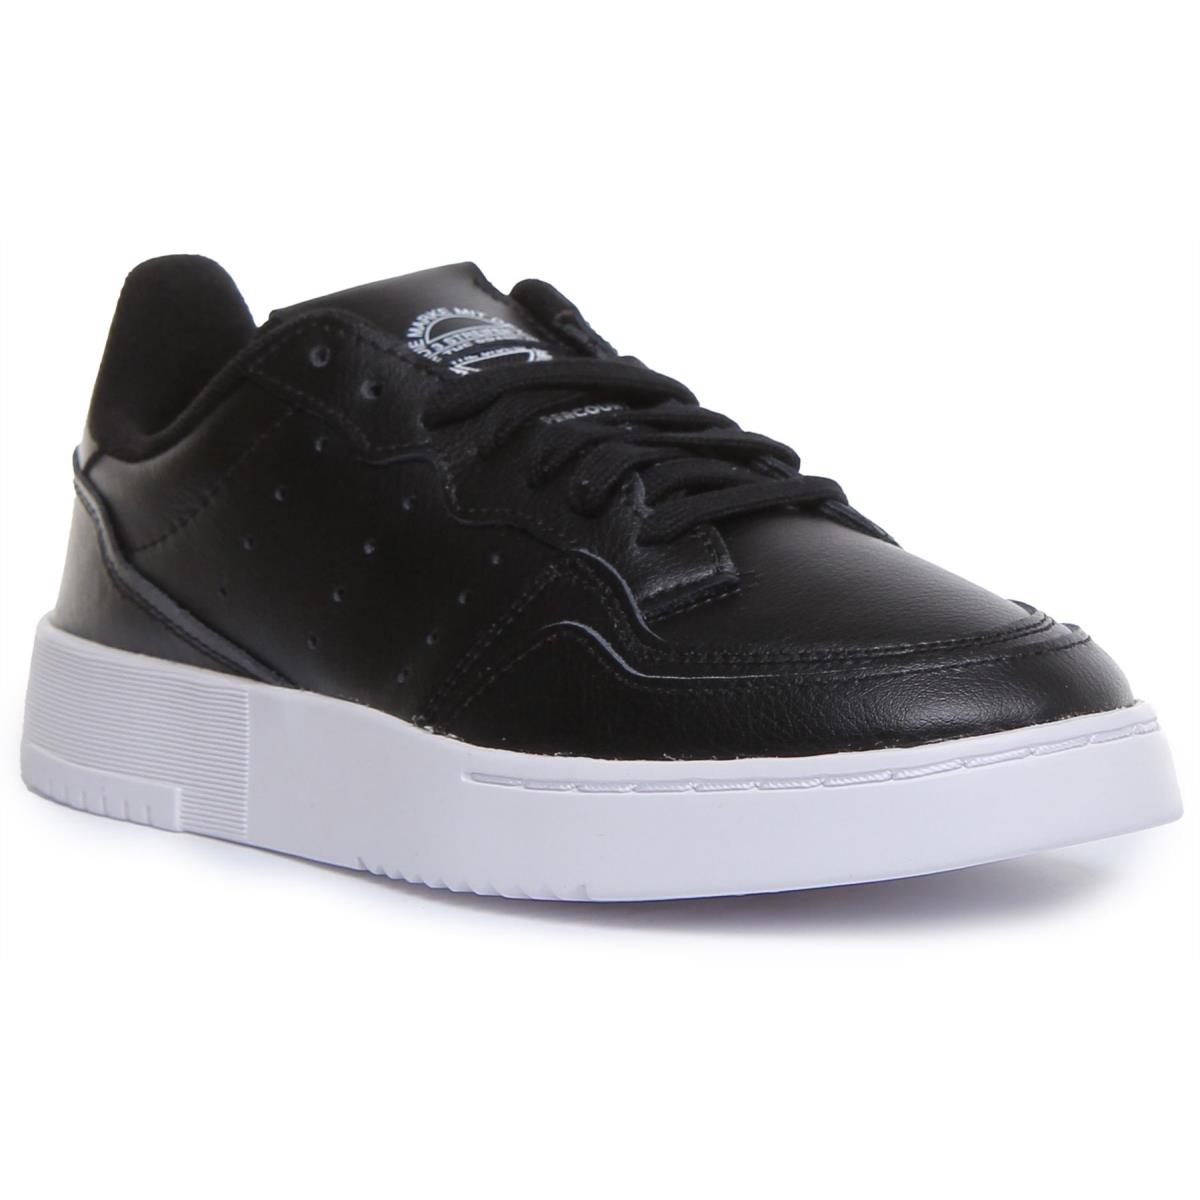 Adidas Supercourt J Youth Lace up Leather Sneakers In Black White Size US 3 - 6 BLACK WHITE